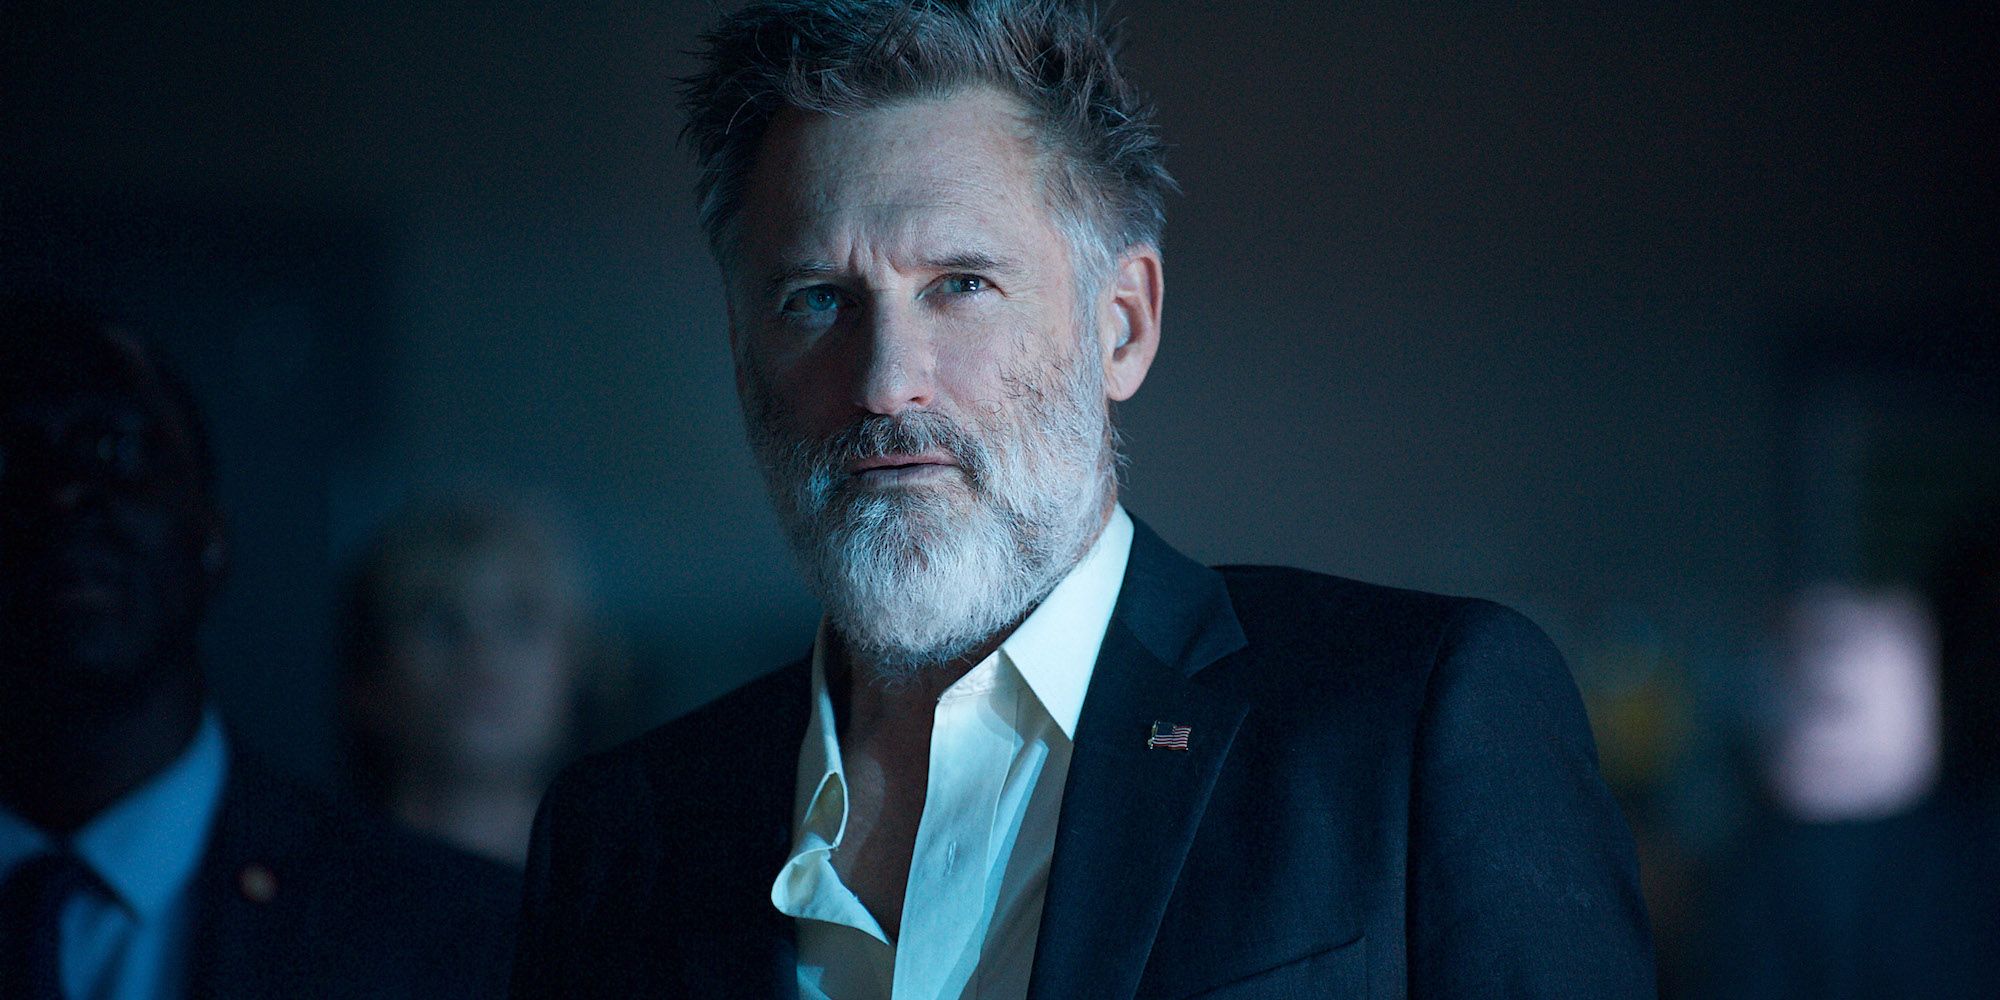 Bill Pullman as President Thomas Whitmore in Independence Day: Resurgence